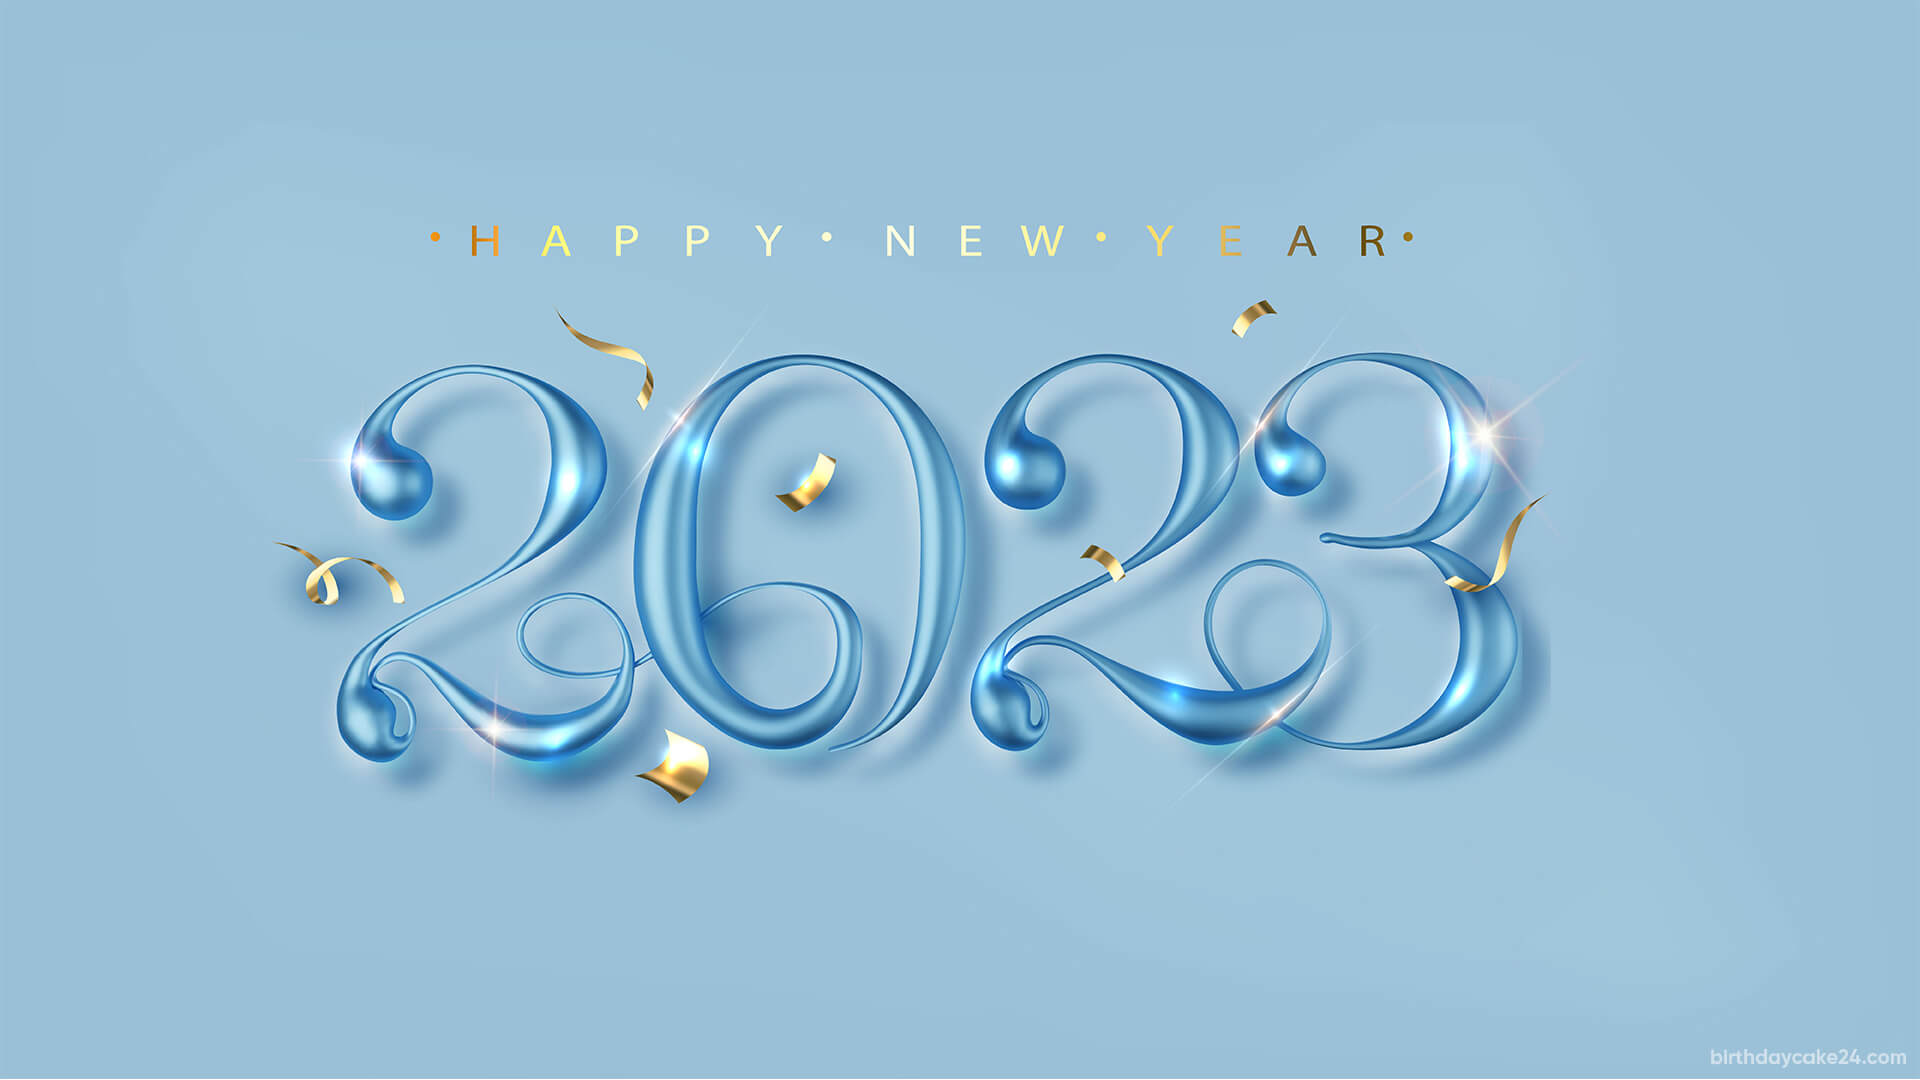 Happy New Year Images 2023: Pictures, Photos, Wallpaper Free Download